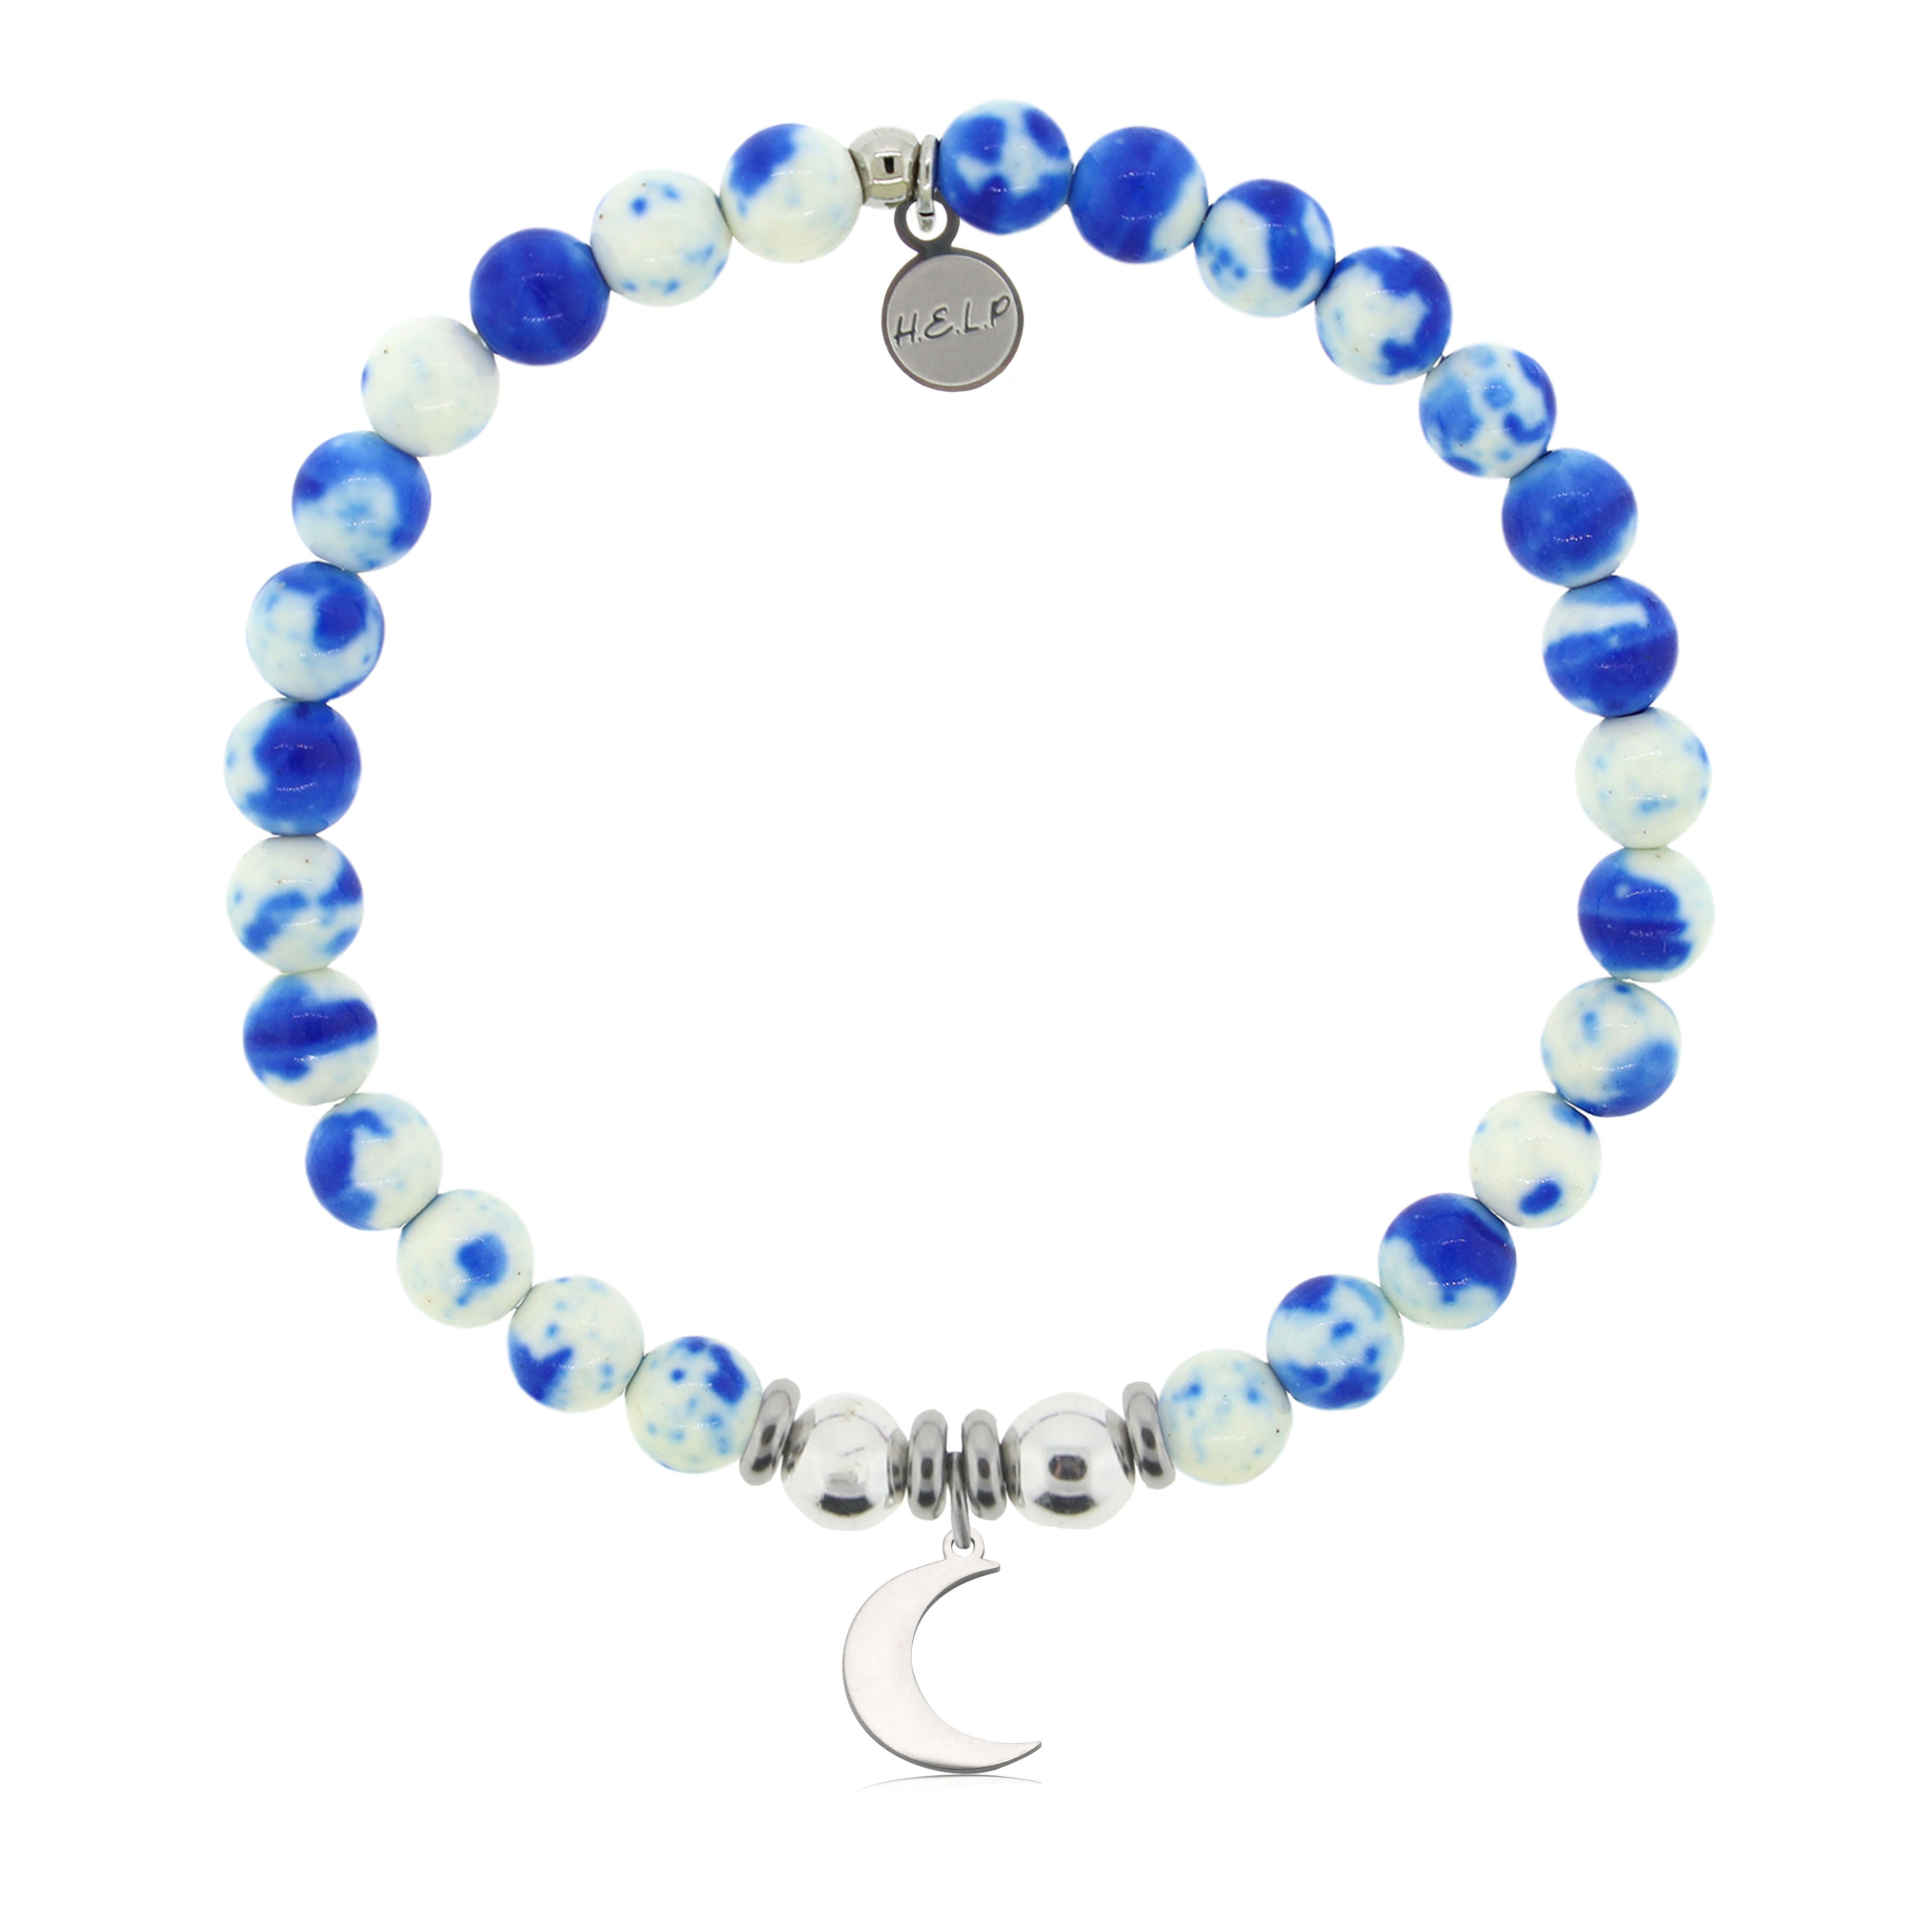 HELP by TJ Moon Cutout Charm with Blue and White Jade Charity Bracelet